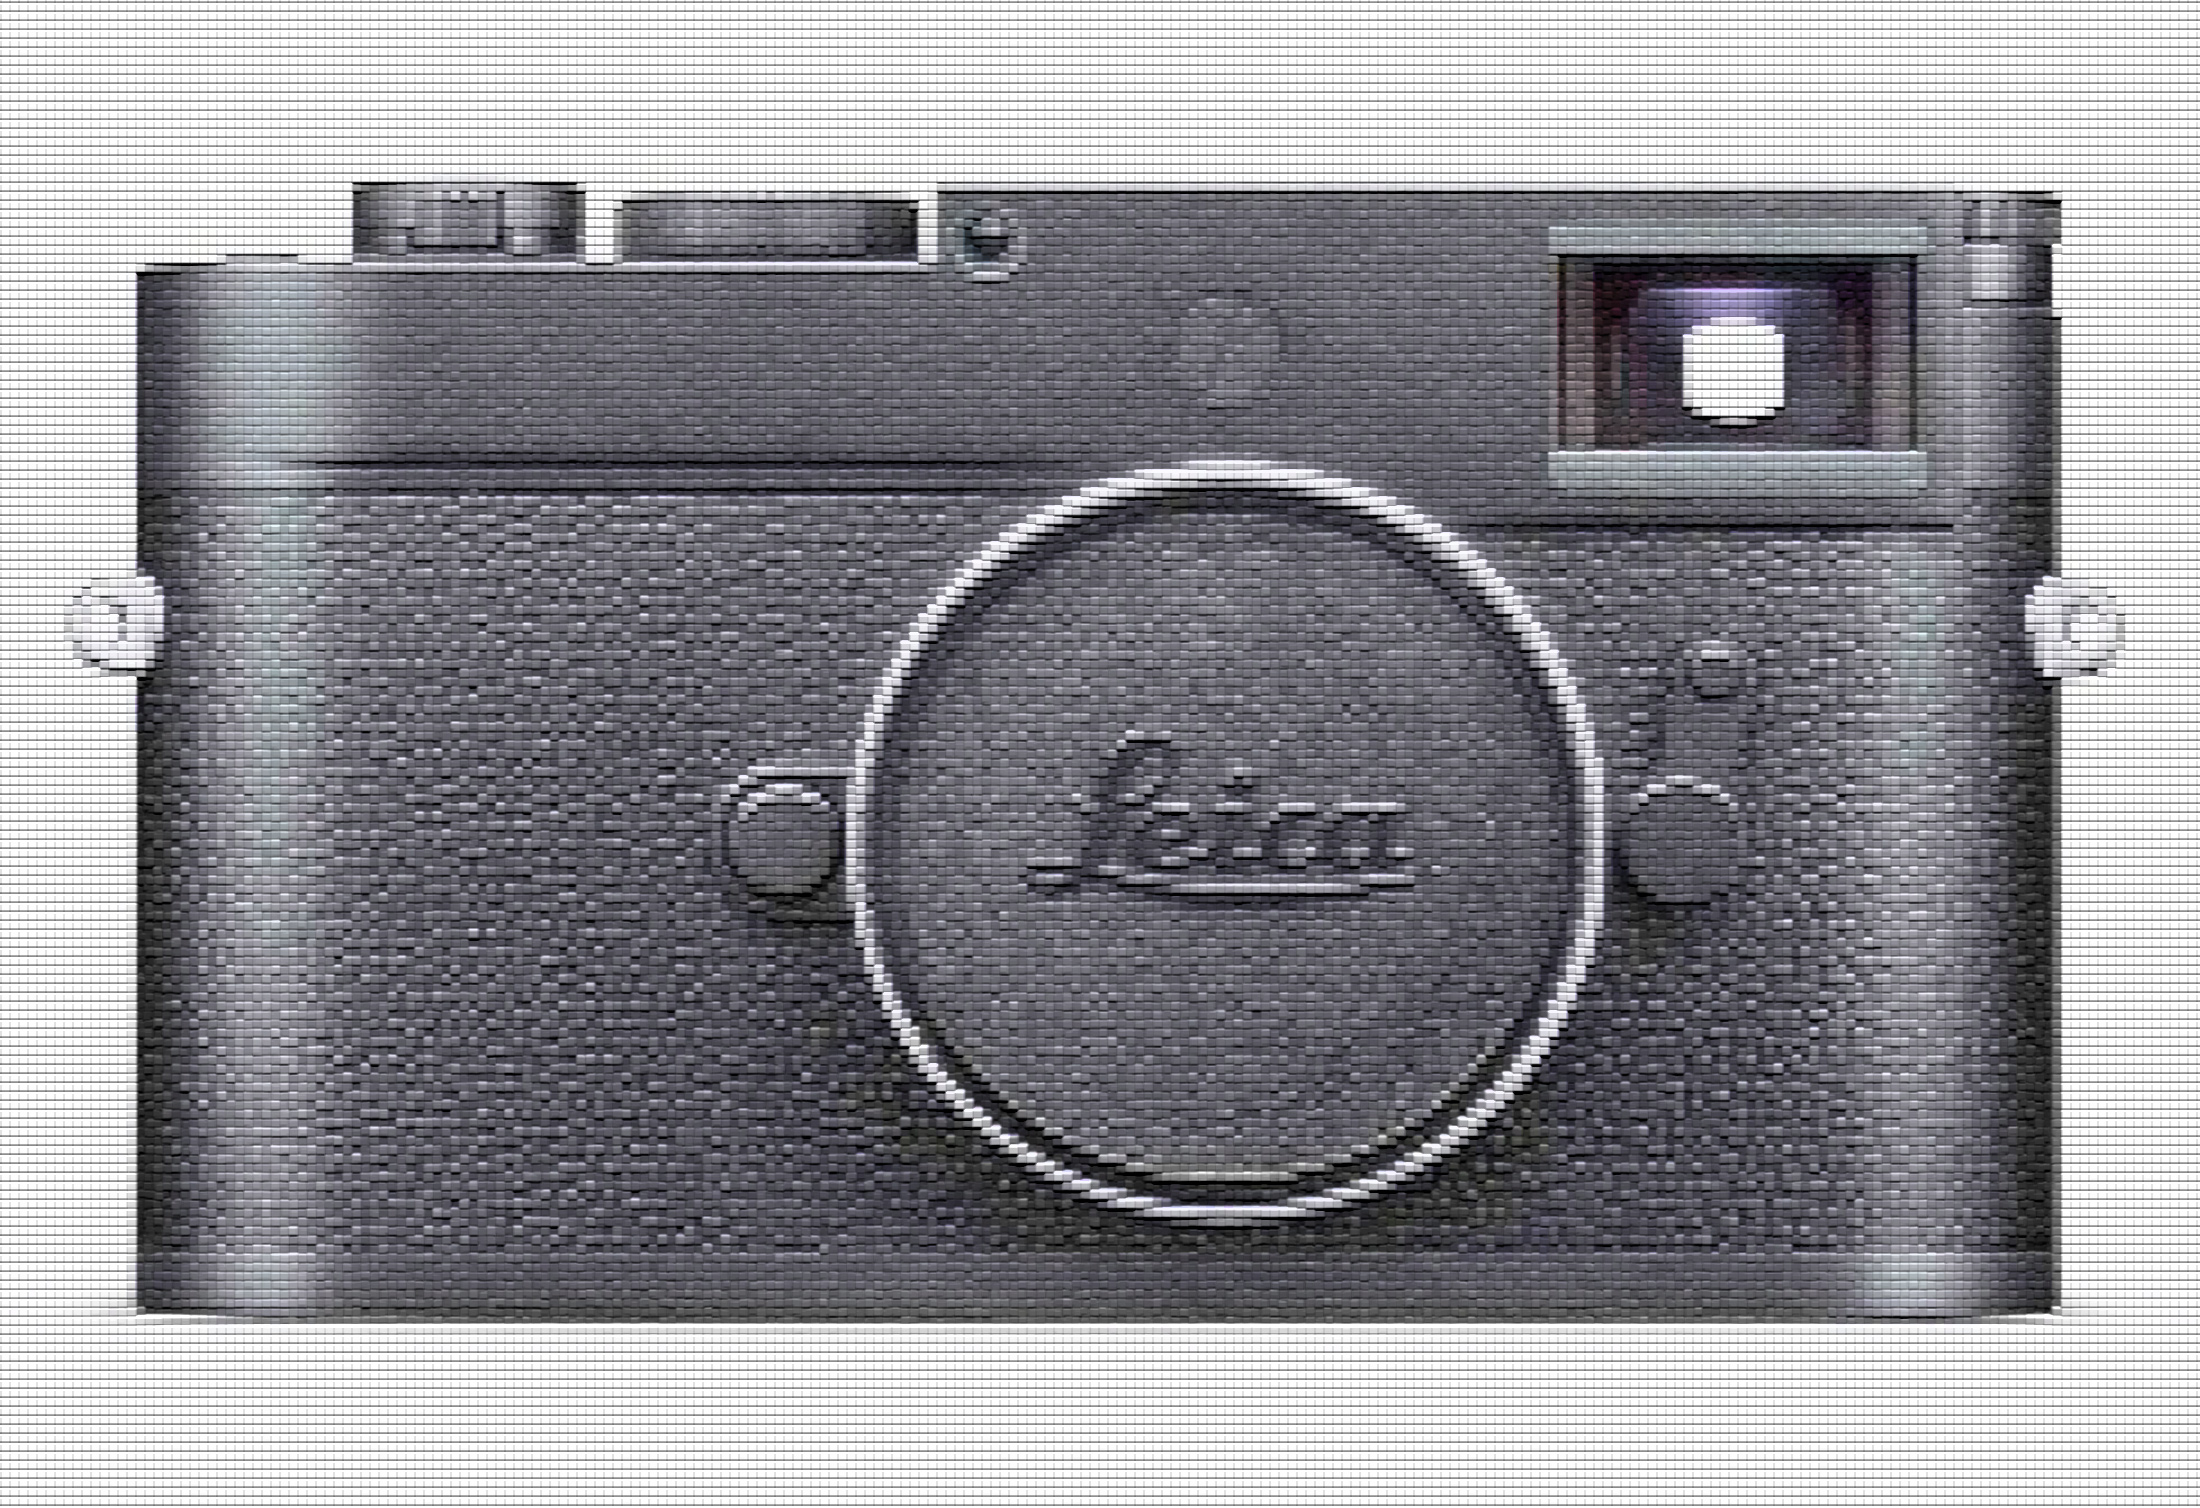 How to focus a Leica M - By photographer Thorsten Overgaard - How